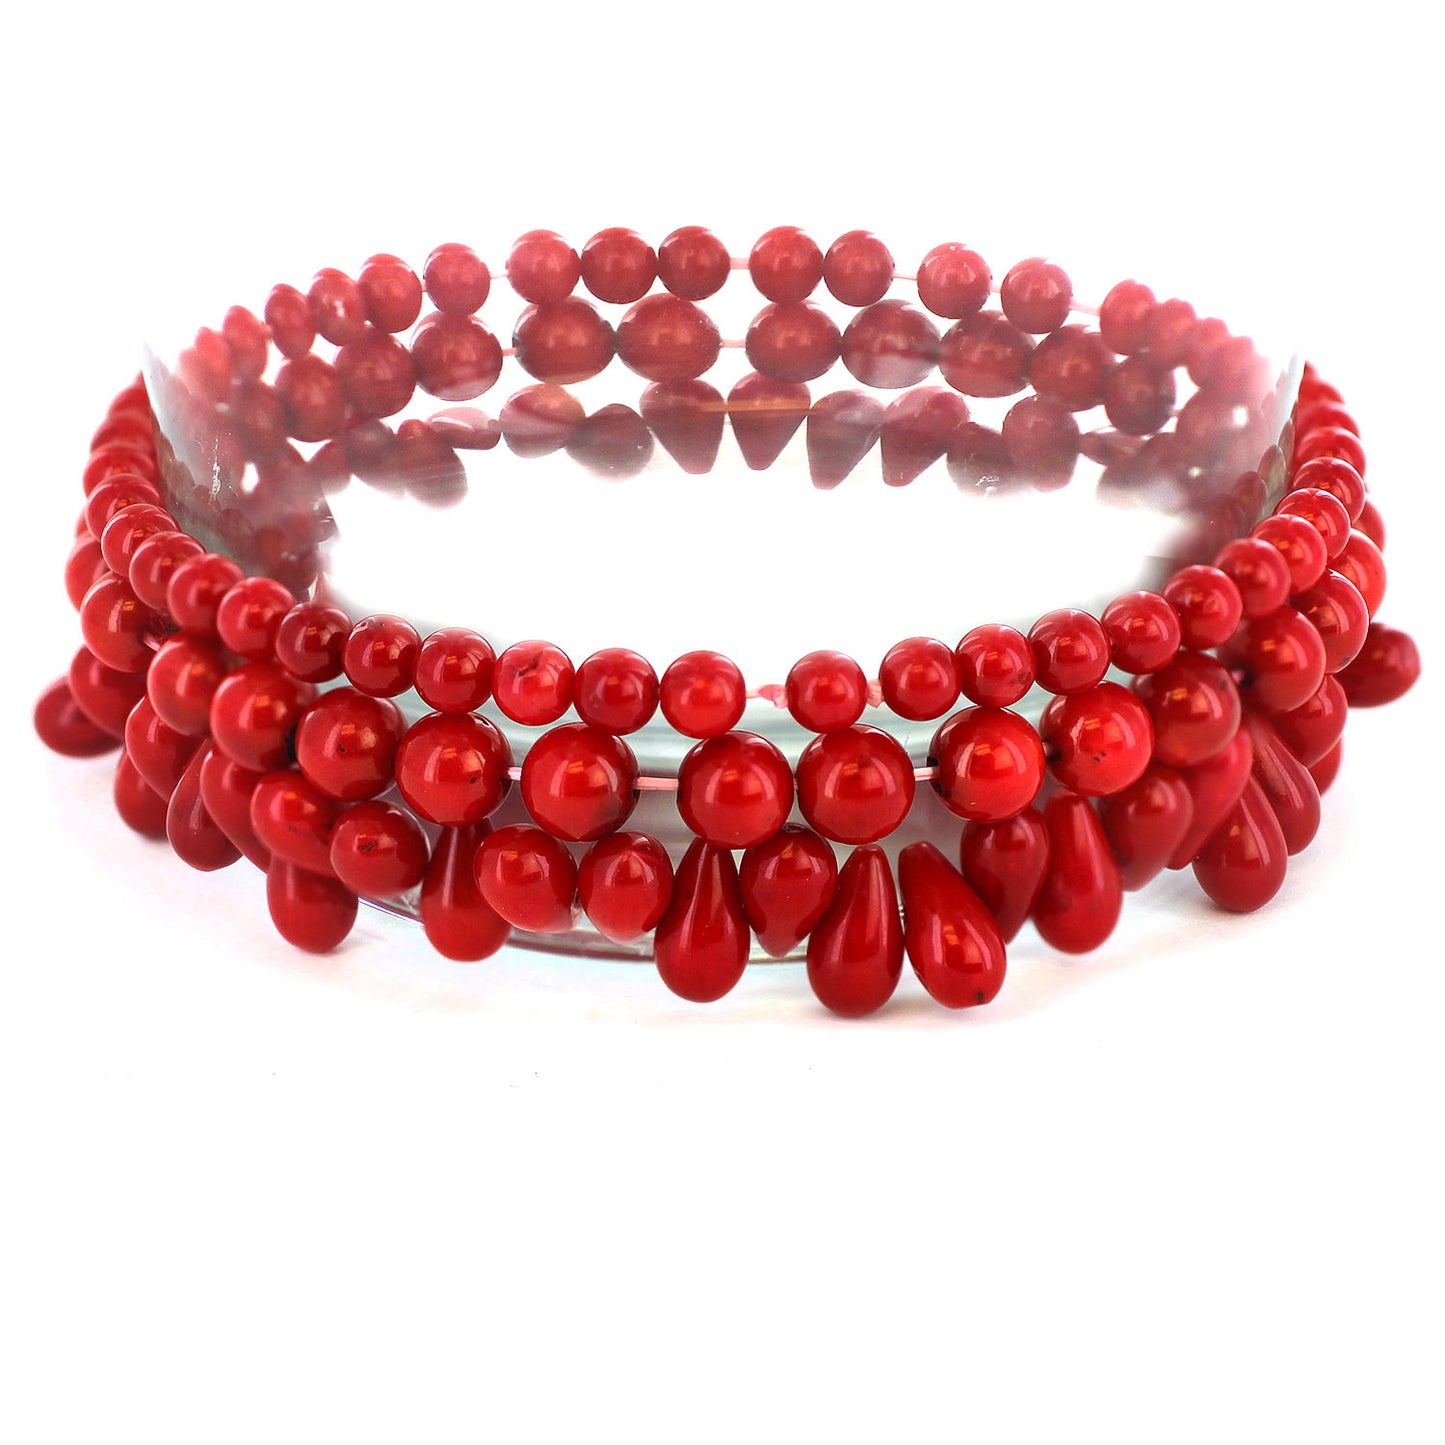 Women's Red Dyed Coral Beaded Bracelets (Set of 3)